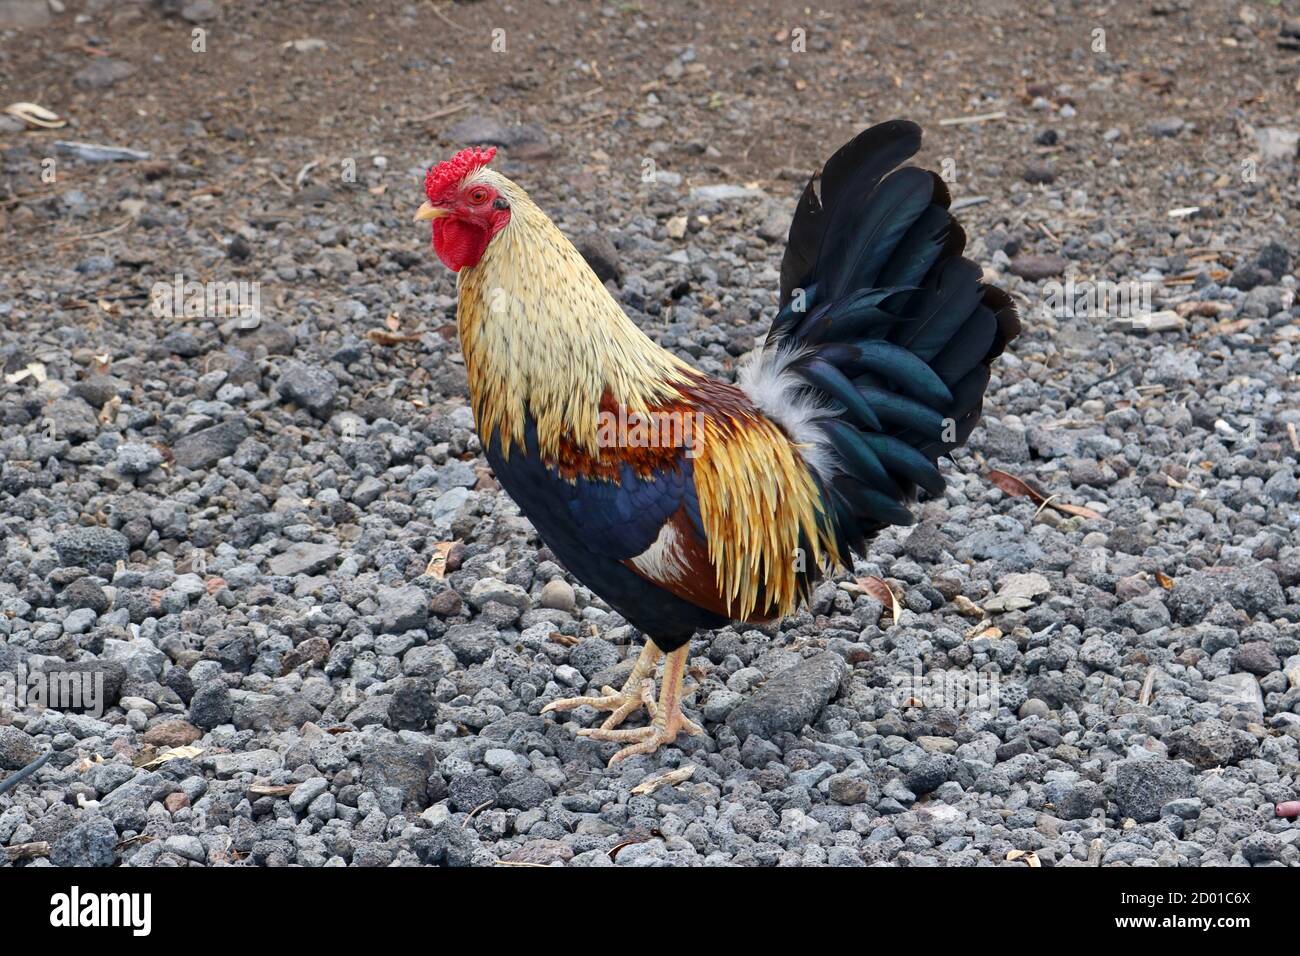 Closeup of a colorful rooster in grey surroundings Stock Photo